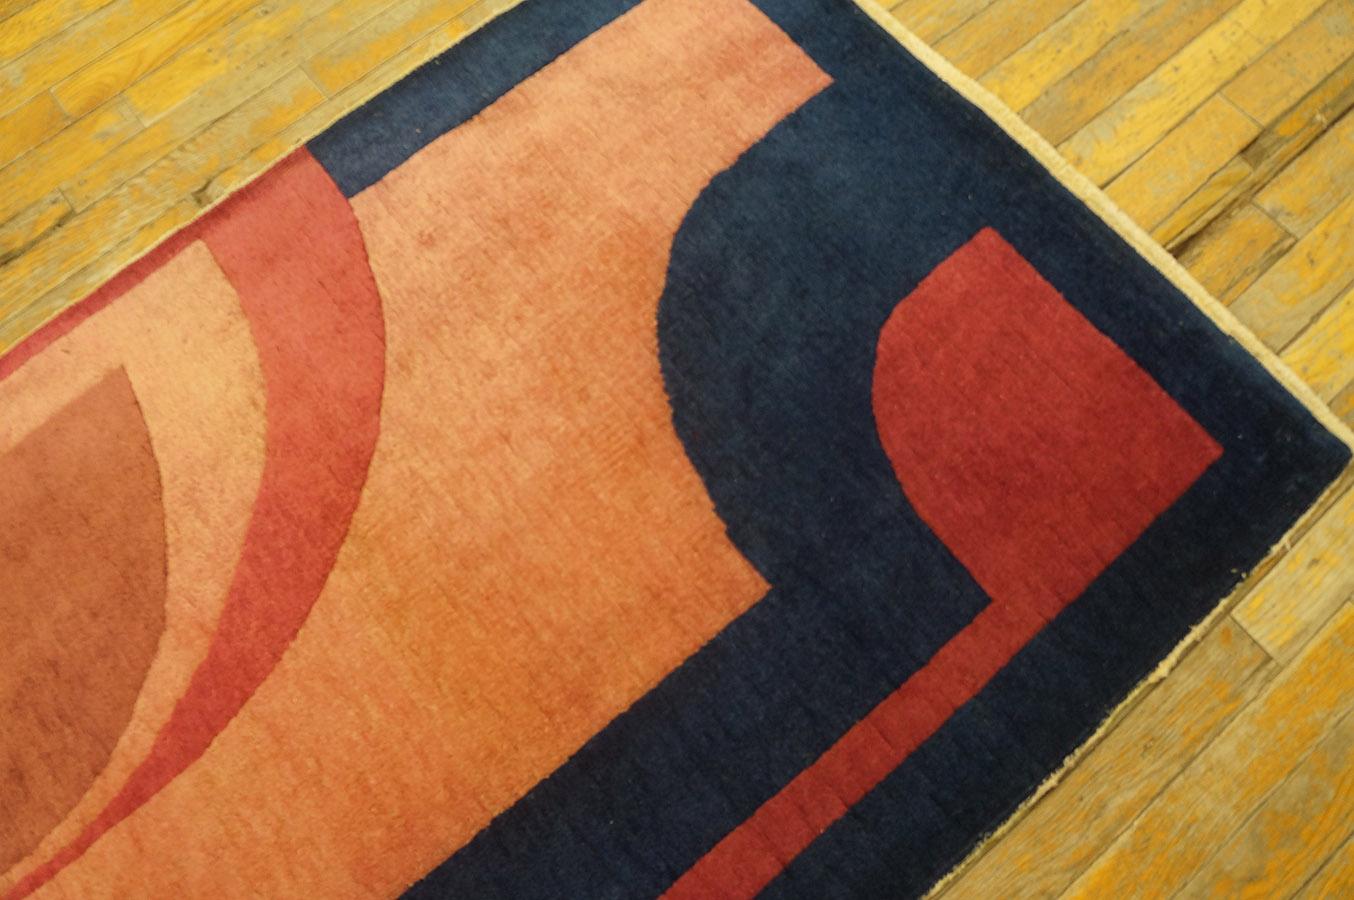 1920s Chinese Art Deco Carpet with Modernist Design (2'10'' x 5'9'' - 86 x 175) For Sale 1